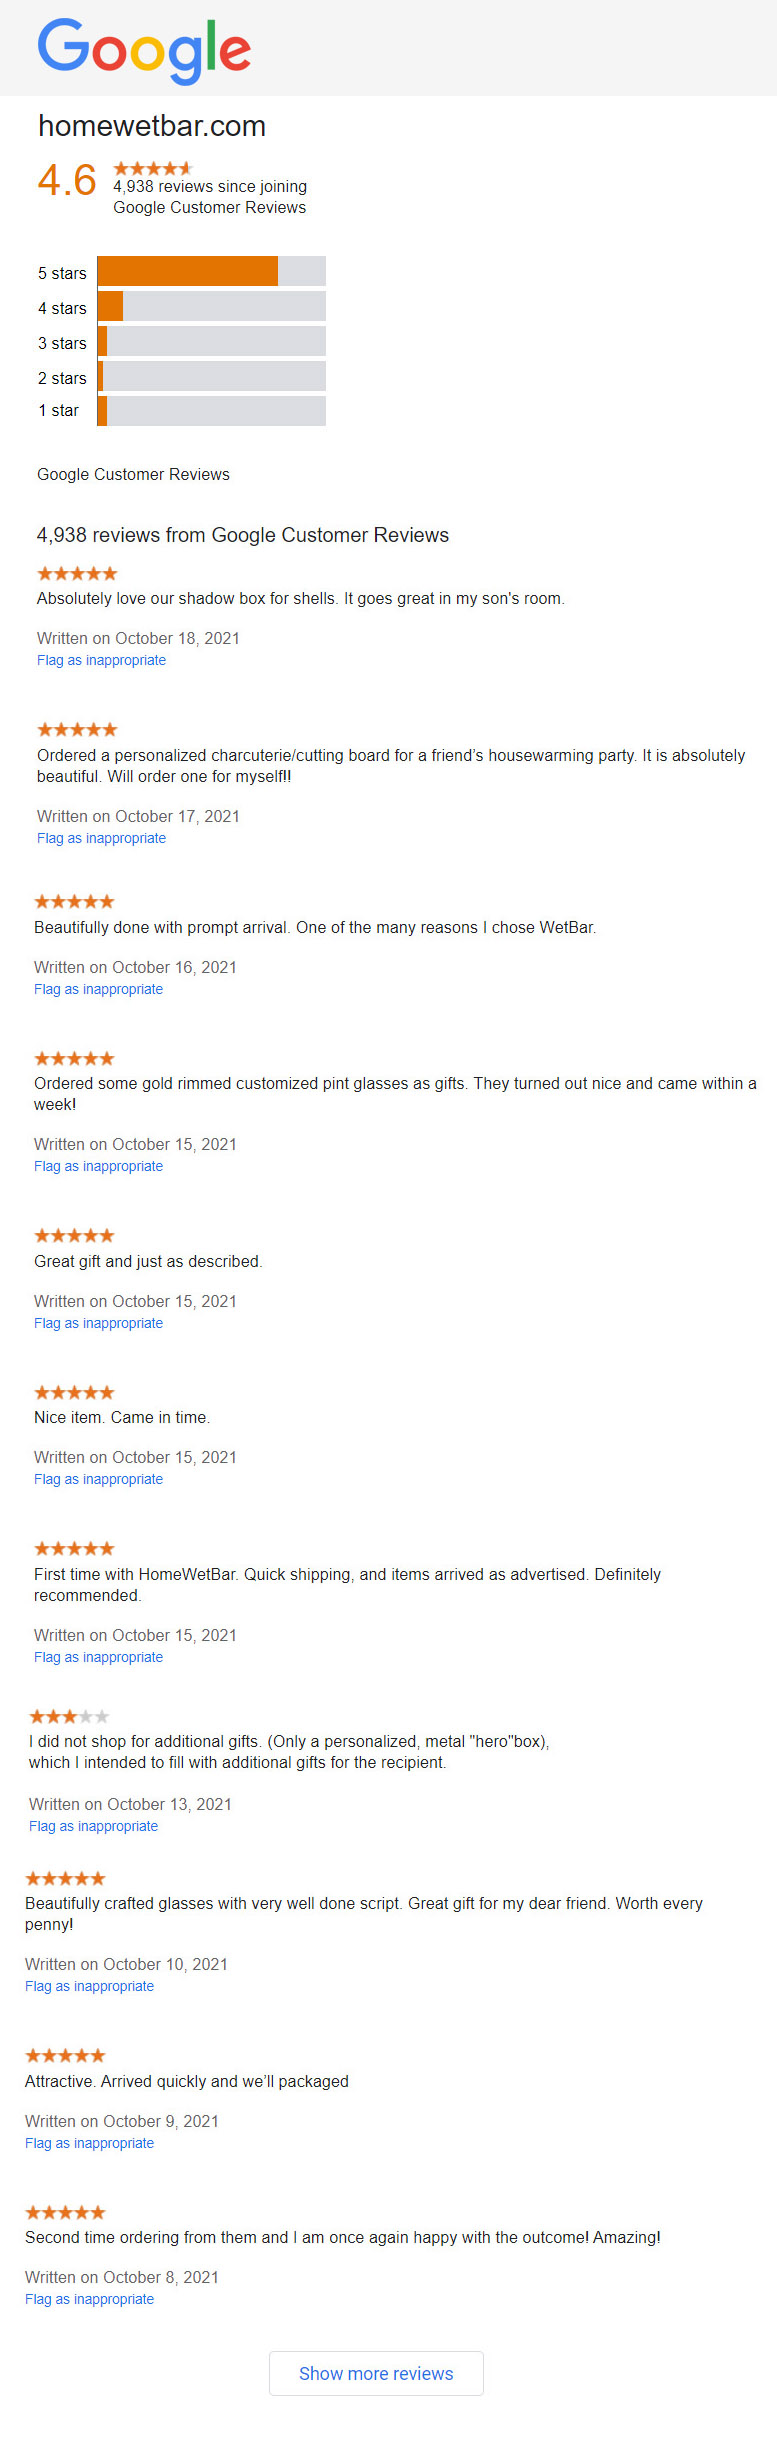 homewetbar reviews rated by Google 